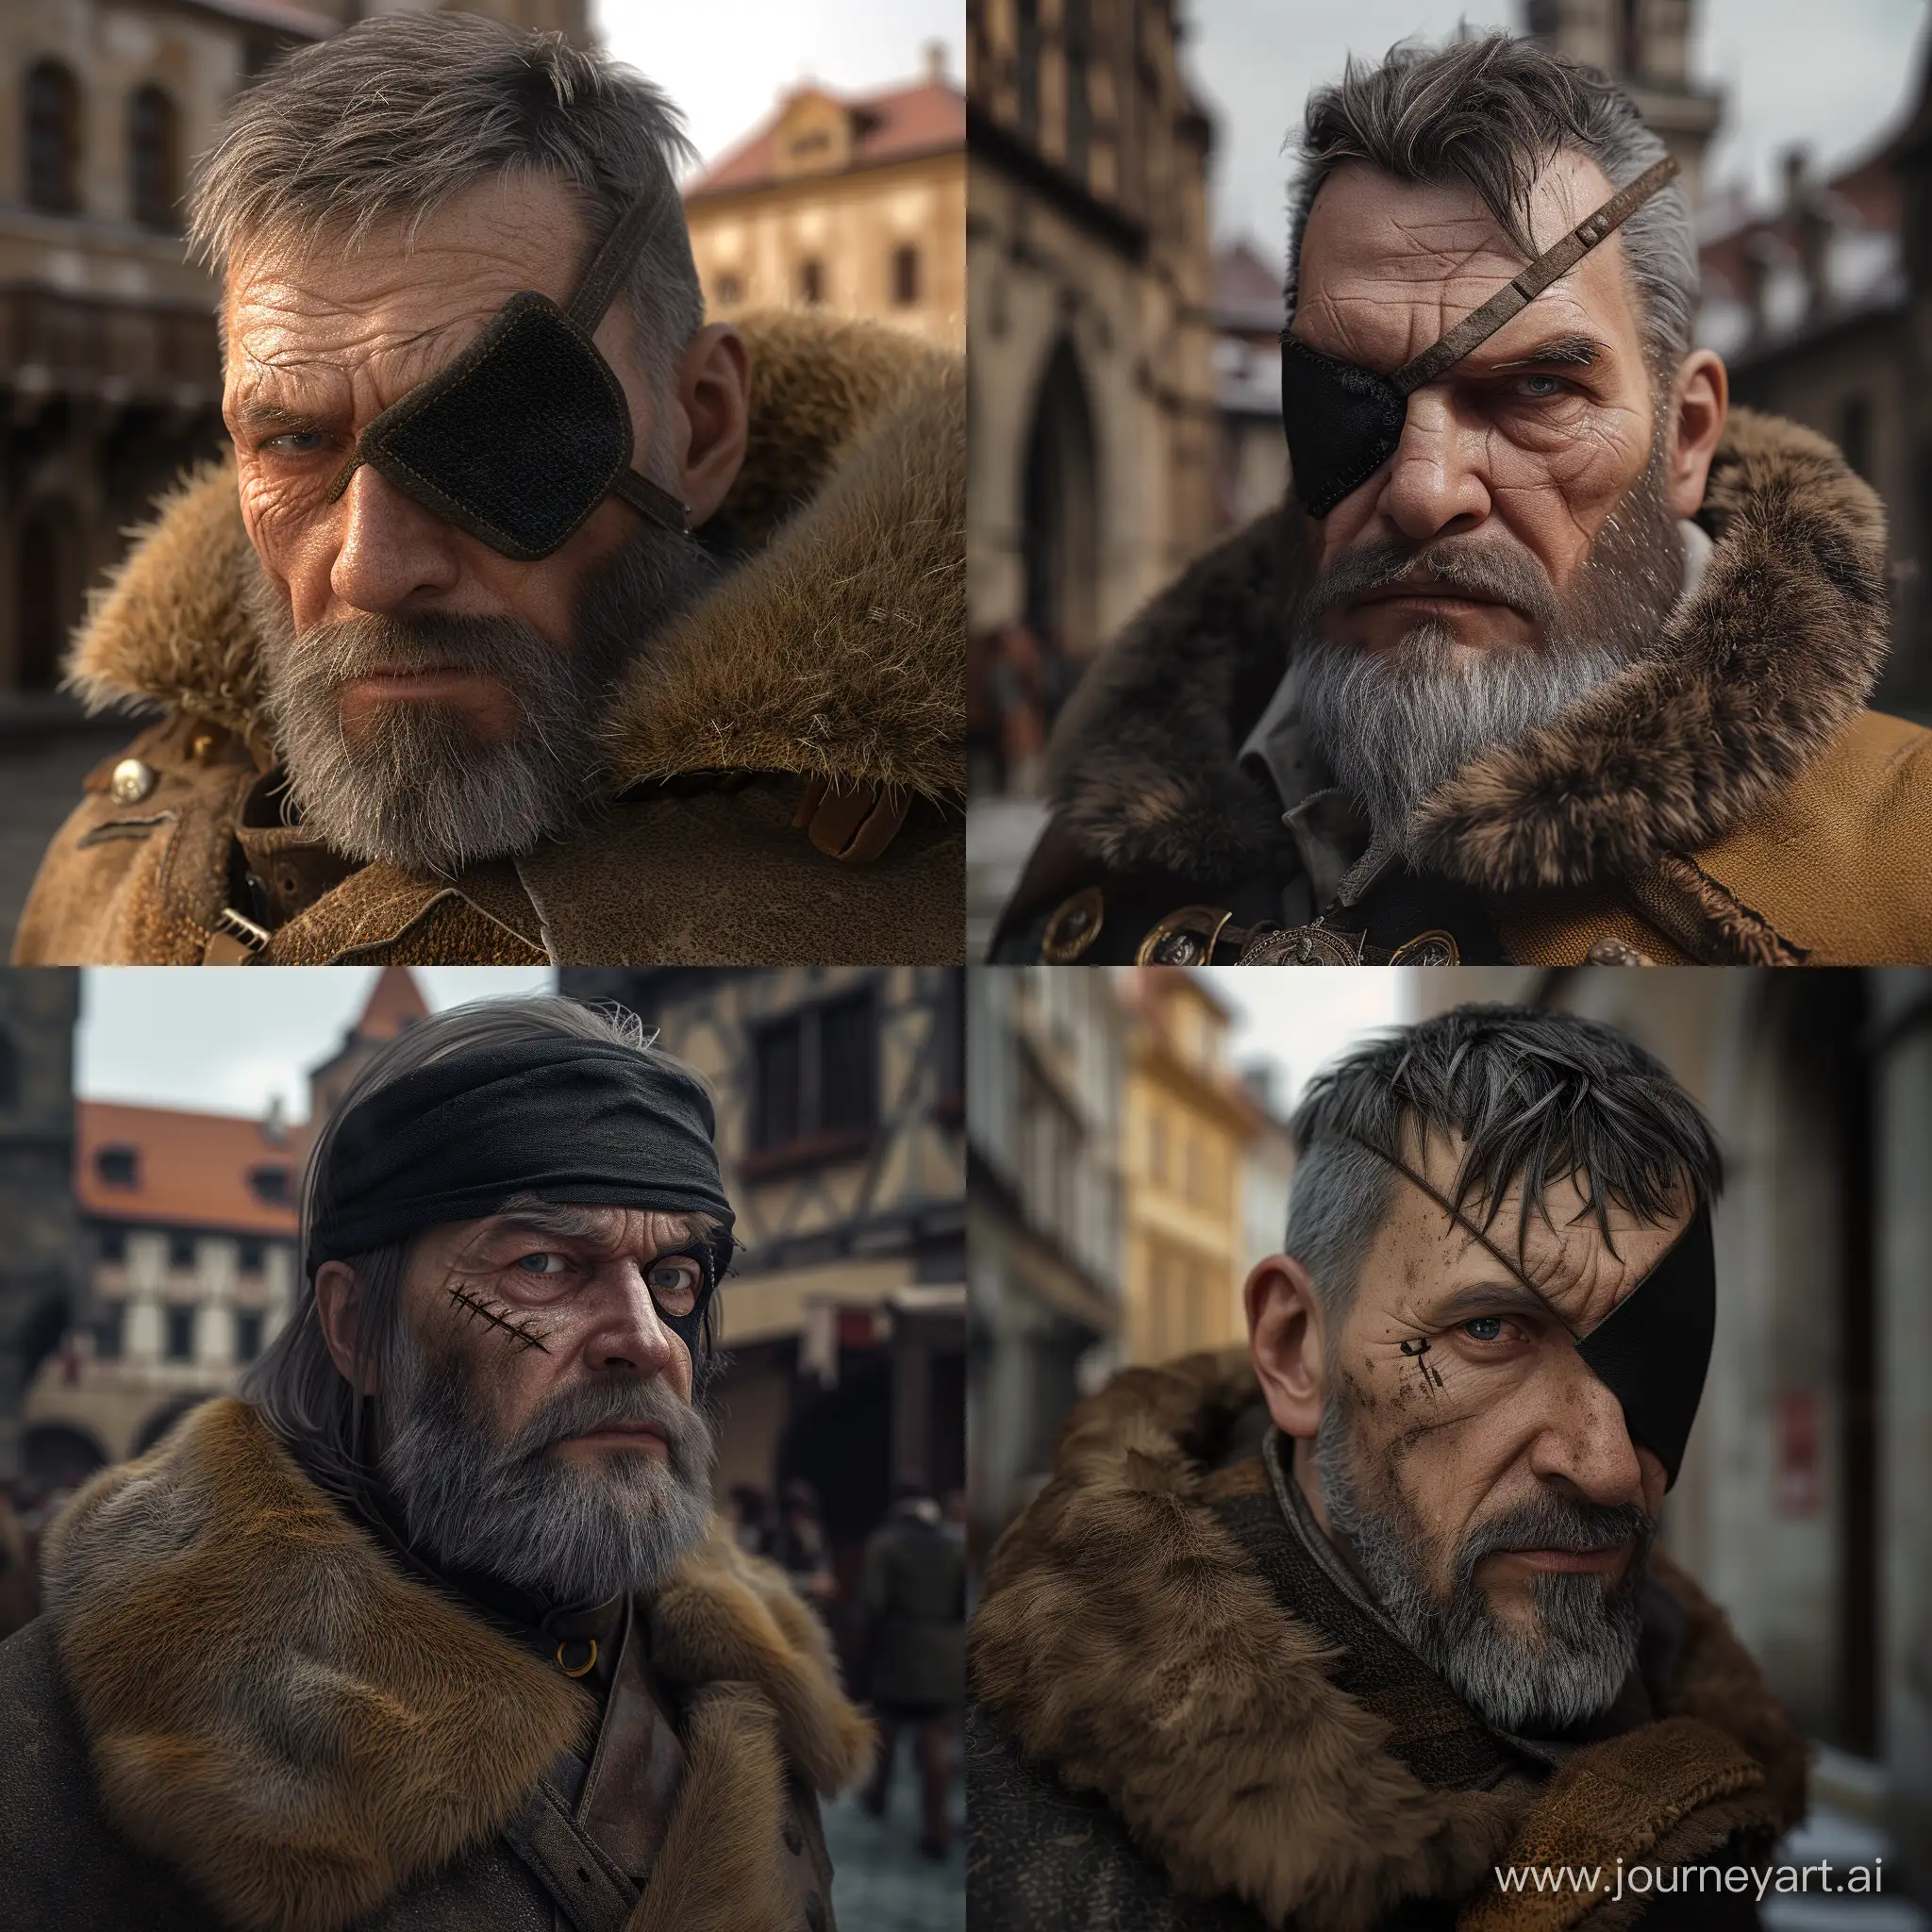 Czech Warlord Jan Zizka, Grizzled Beard, Thinning Gray Hair, his one eye is hidden with a black cloth eyepatch, wearing a coat with fur collar and fur hat, cinematic shots, realistic, 4k, photo realistic, cinematic lighting, in the medieval city centre